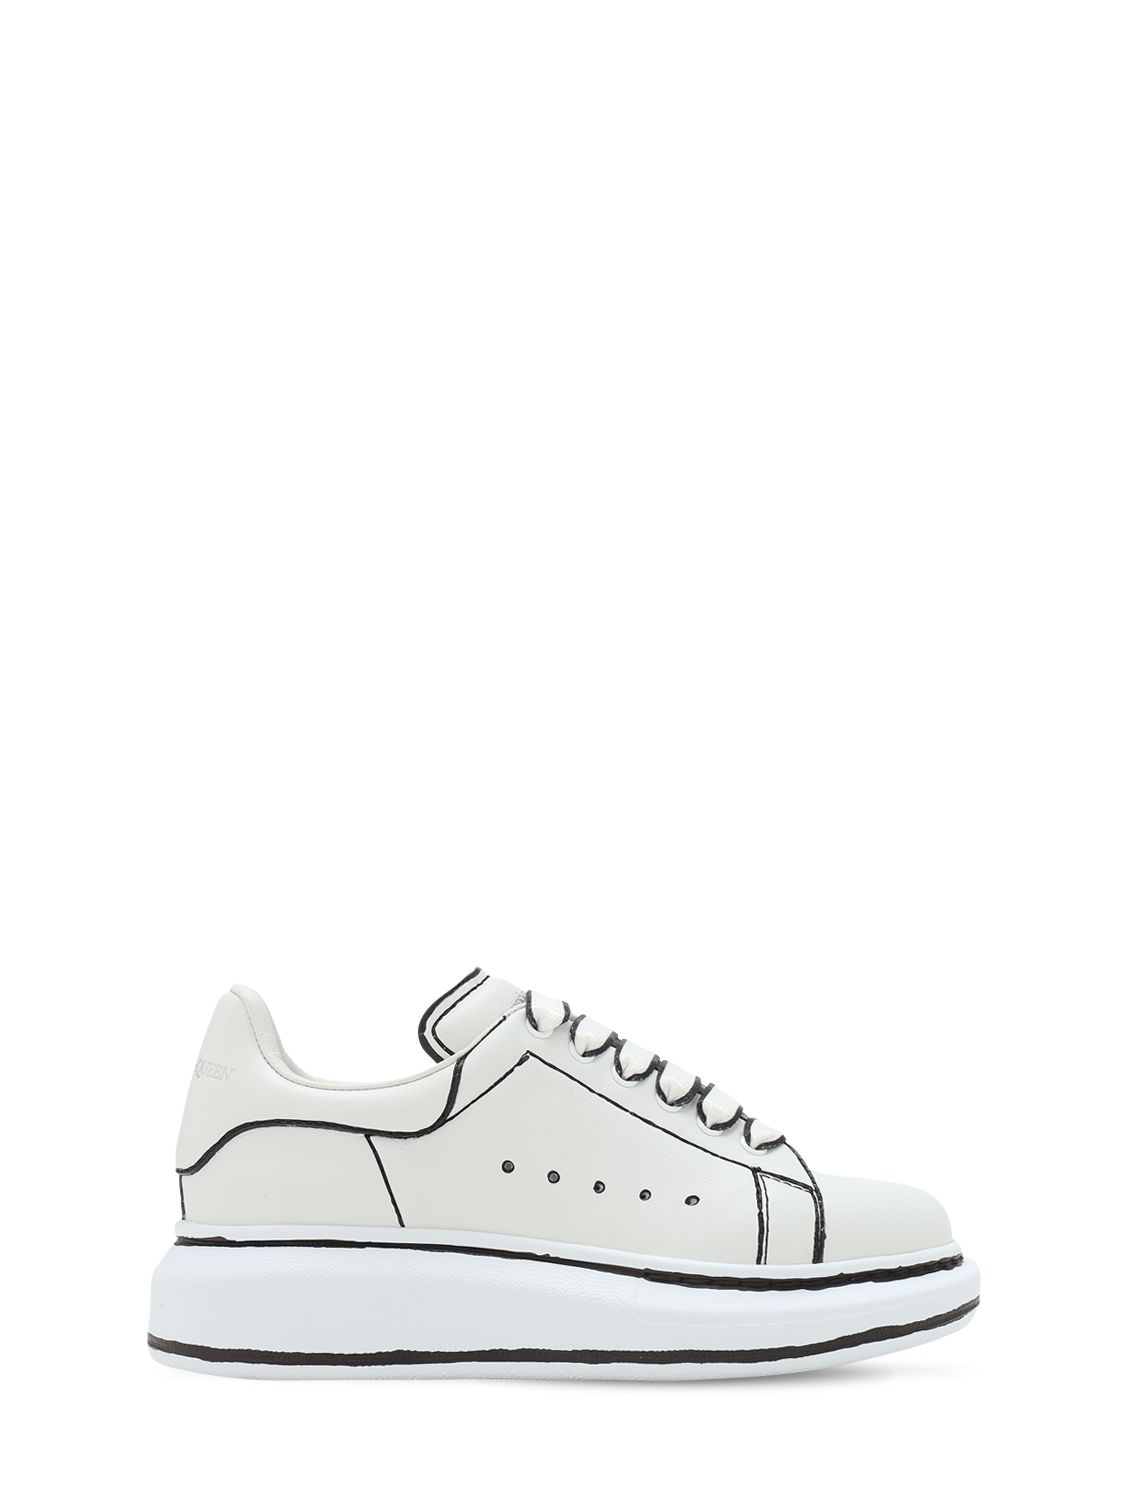 ALEXANDER MCQUEEN LEATHER LACE-UP SNEAKERS,72ILXS005-OTA2MQ2